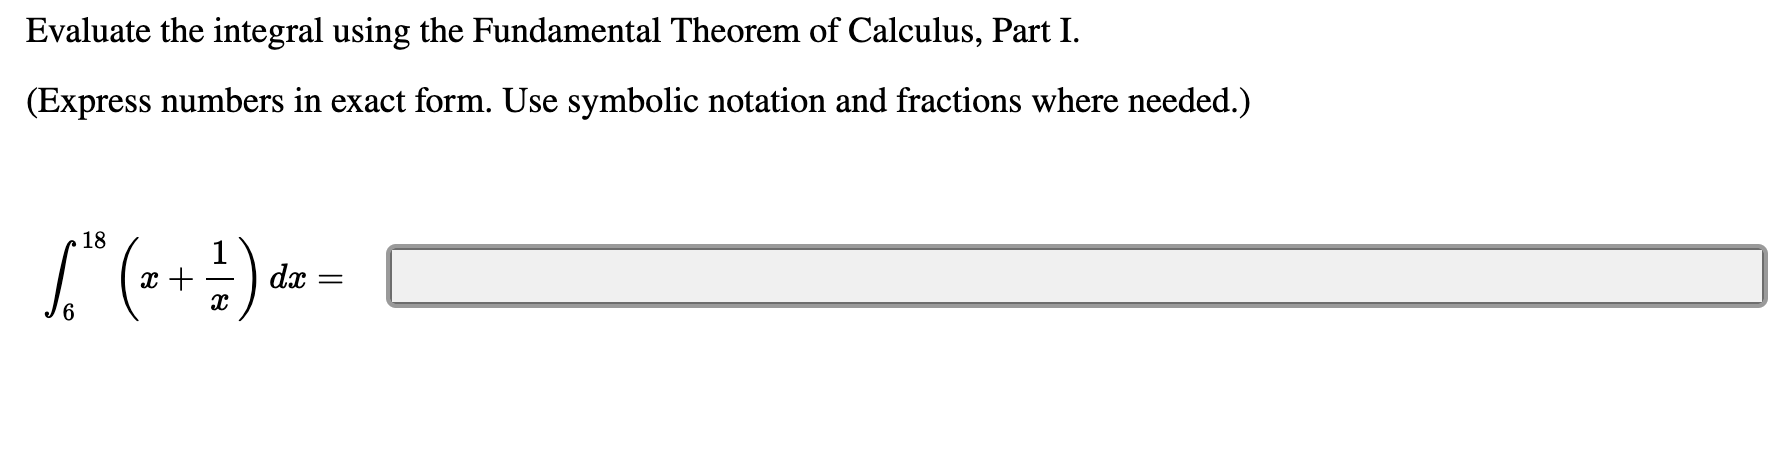 Evaluate the integral using the Fundamental Theorem of Calculus, Part I.
(Express numbers in exact form. Use symbolic notation and fractions where needed.)
Г.
18
dх —
